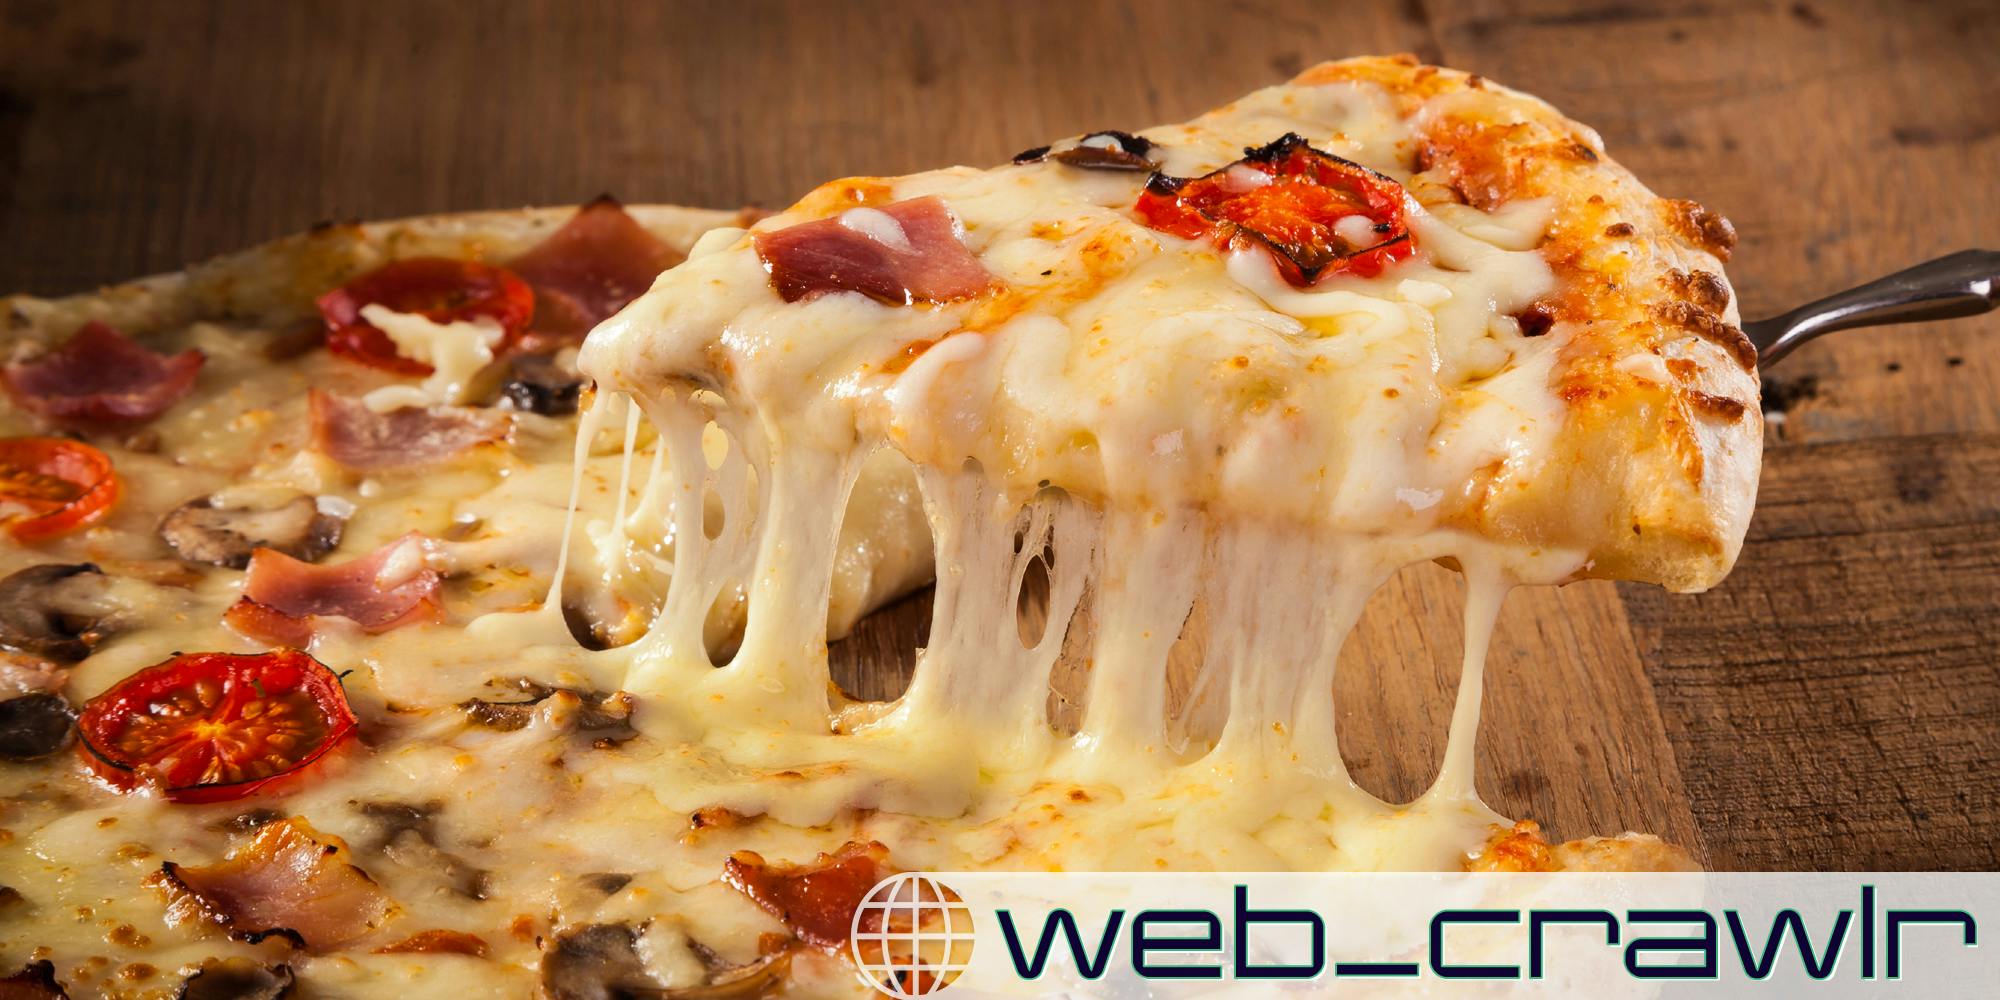 A piece of pizza. The Daily Dot newsletter web_crawlr logo is in the bottom right corner.